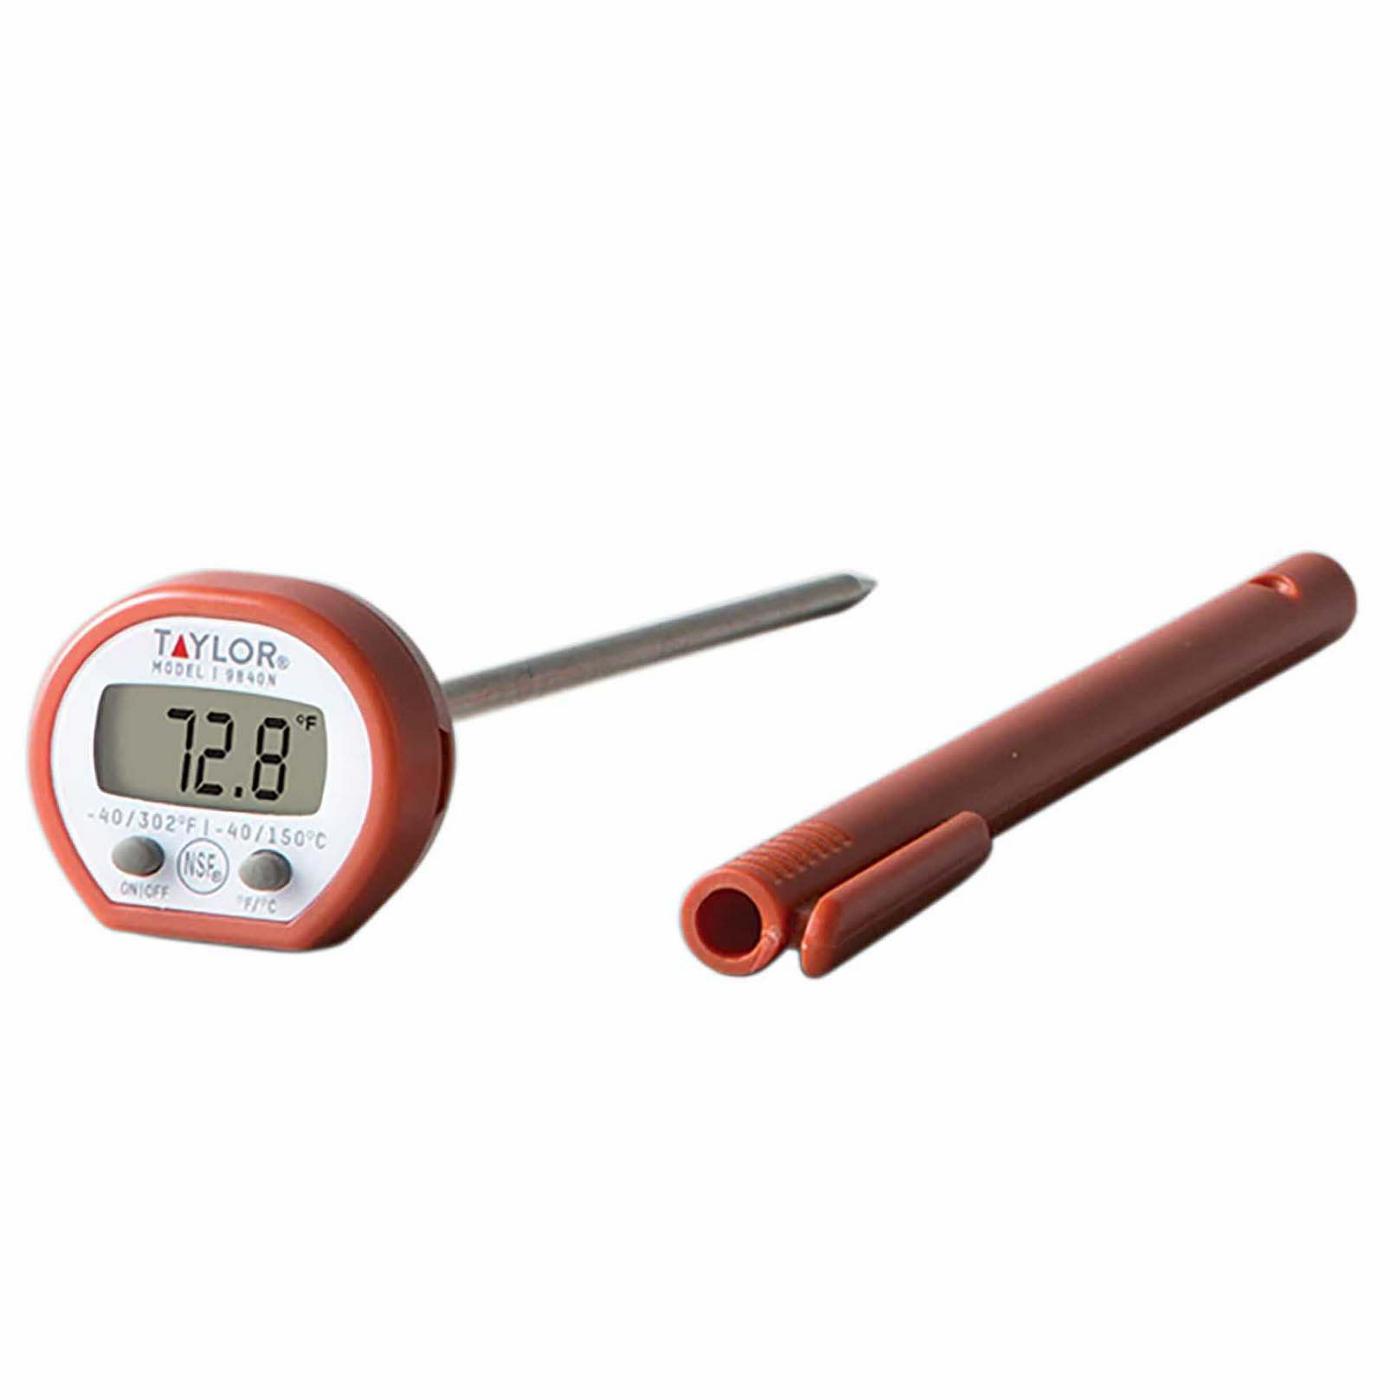 Taylor Instant Read Pocket Thermometer